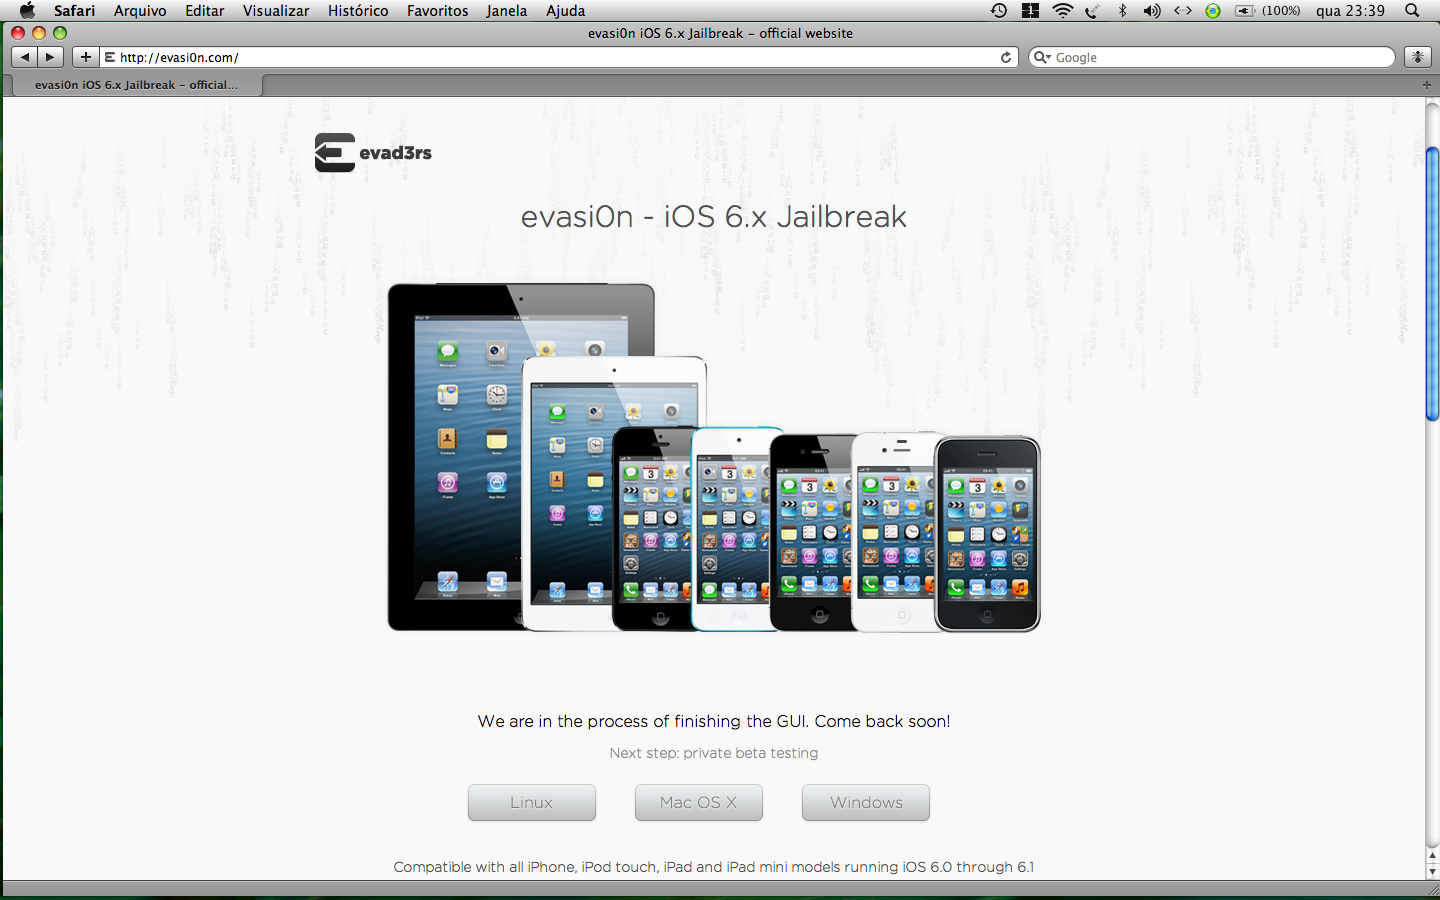 “Evasi0n” is the name of the new jailbreak solution from the newly formed evad3rs group